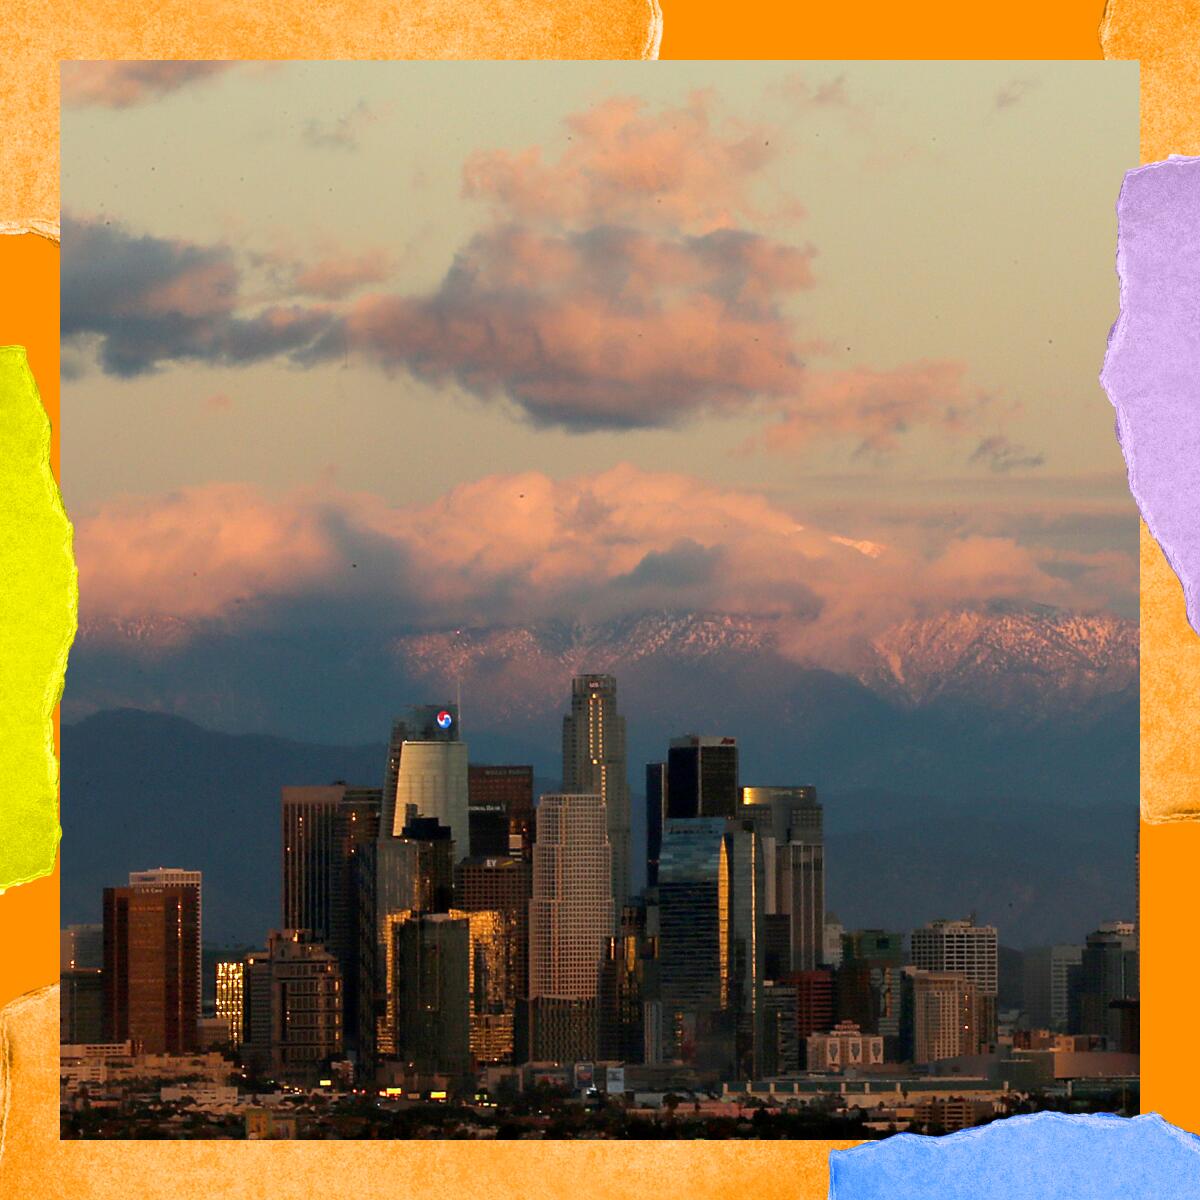 The snow-covered San Gabriel Mountains provide a dramatic backdrop for the downtown Los Angeles skyline.